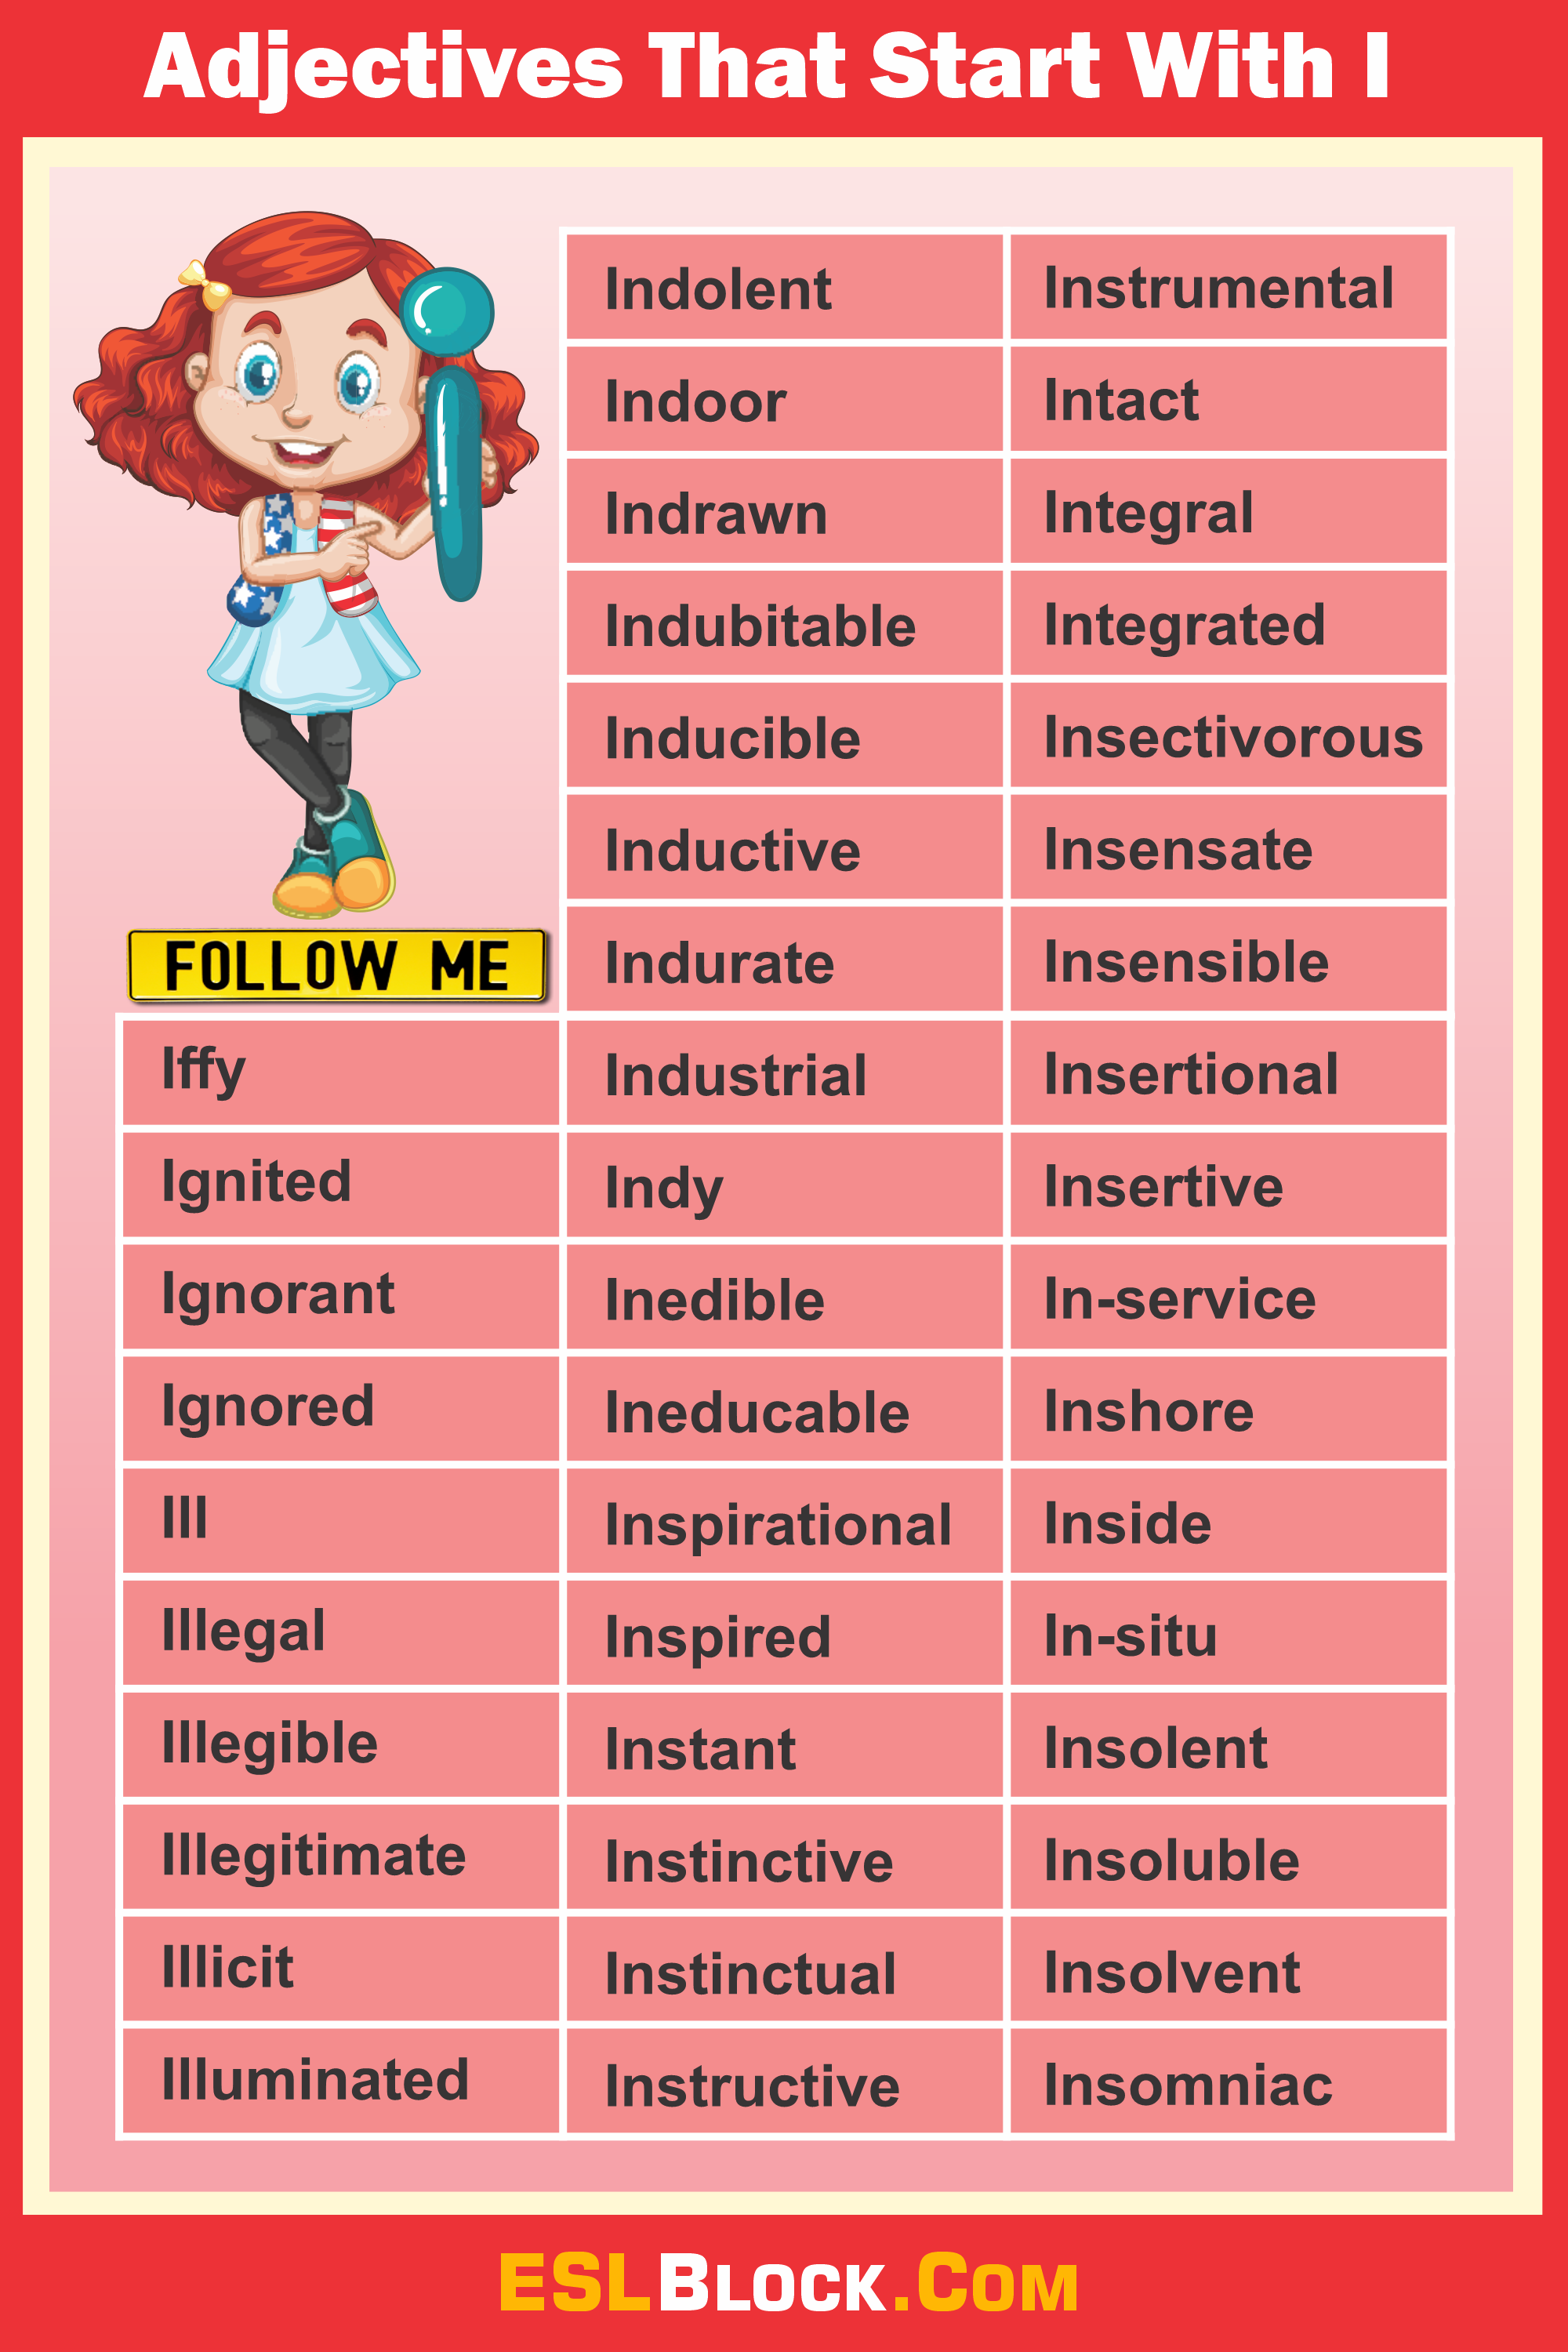 A-Z Adjectives, Adjective Words, Adjectives, I Words, Vocabulary, Words That Describe a Person, Adjectives that start with I